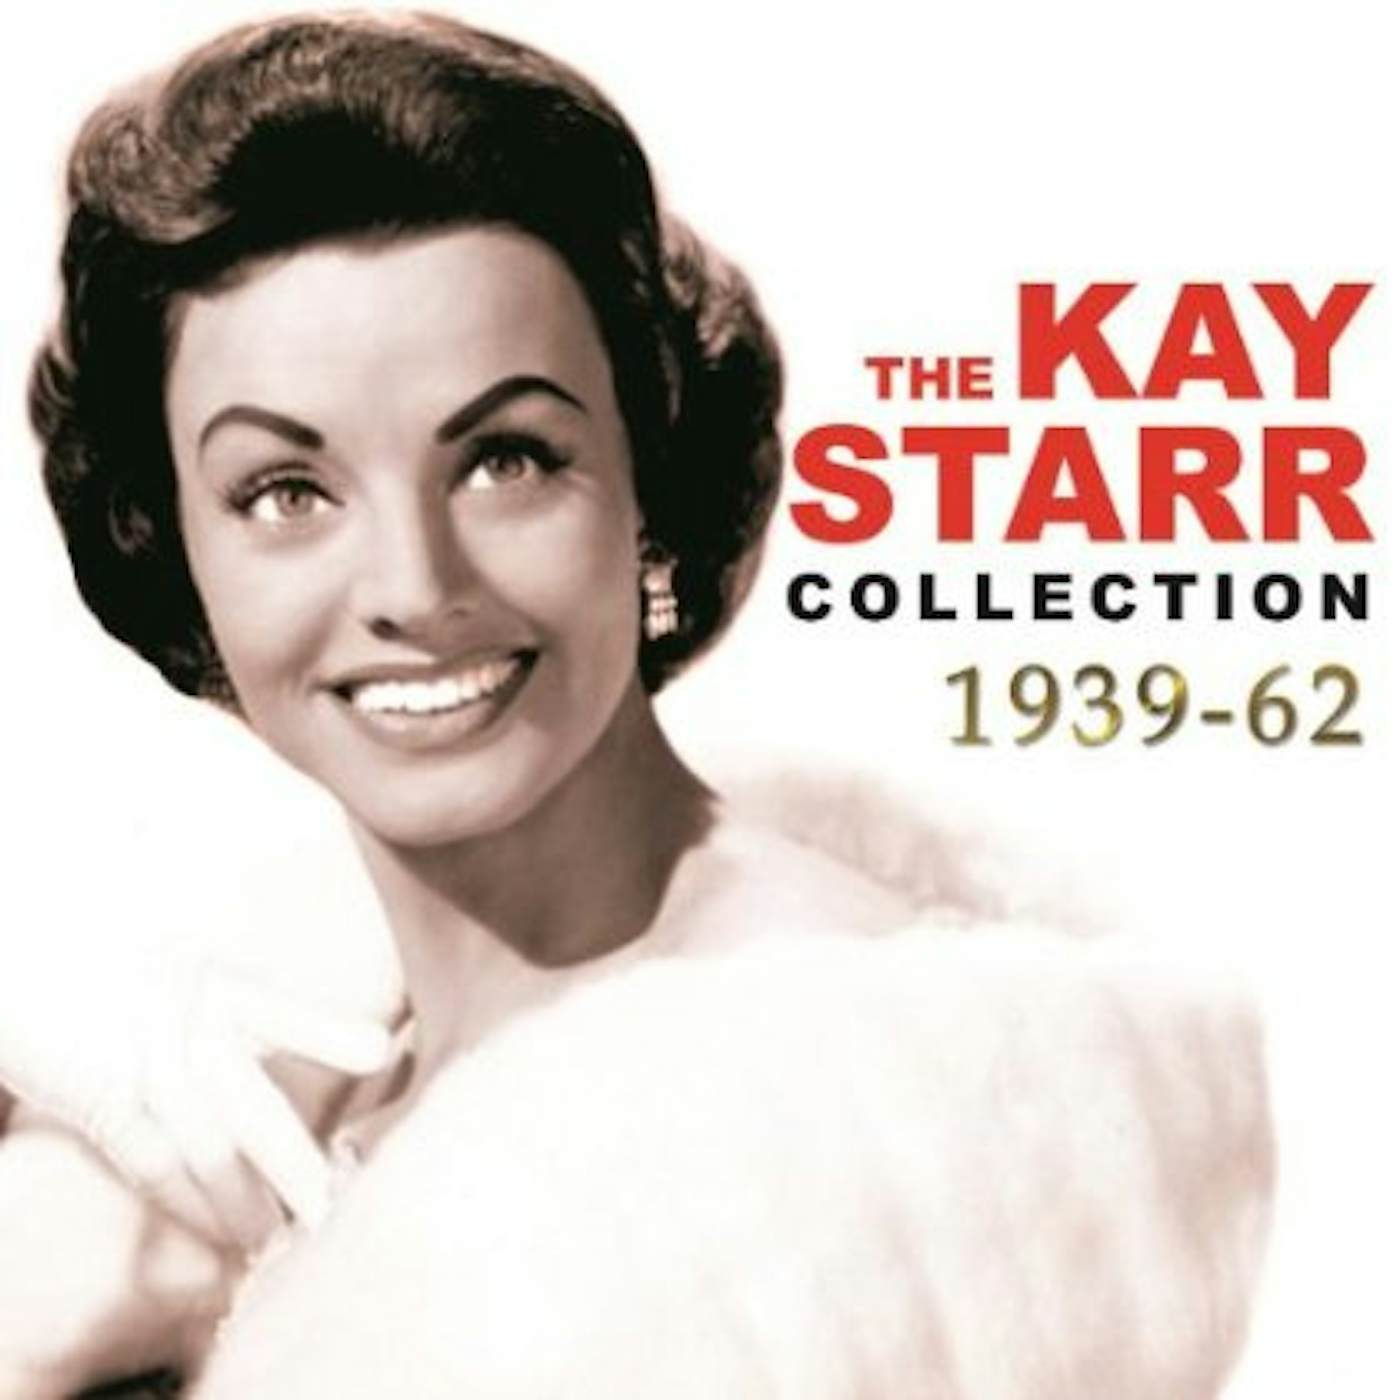 KAY STARR COLLECTION 1939-62 CD